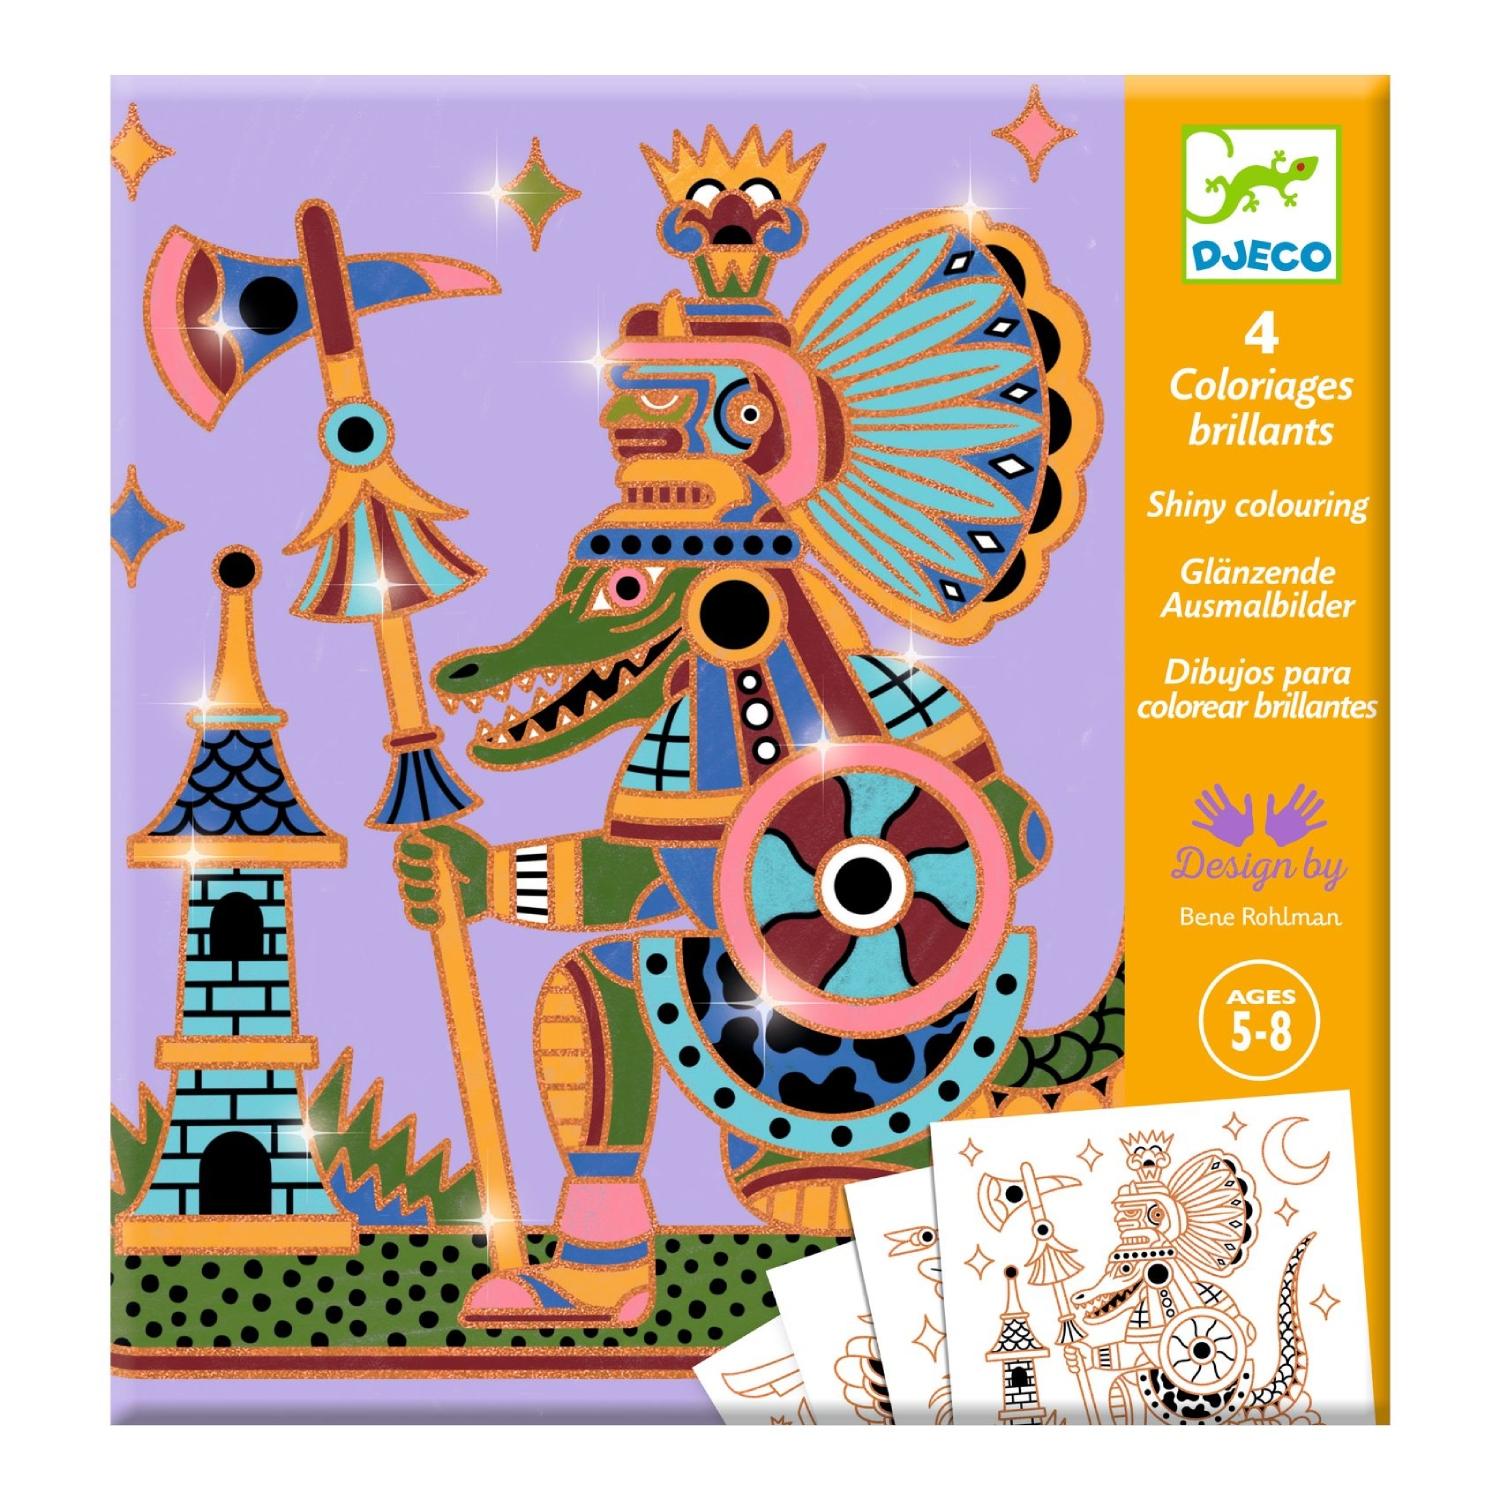 colouring surprises animal warriors by Djeco